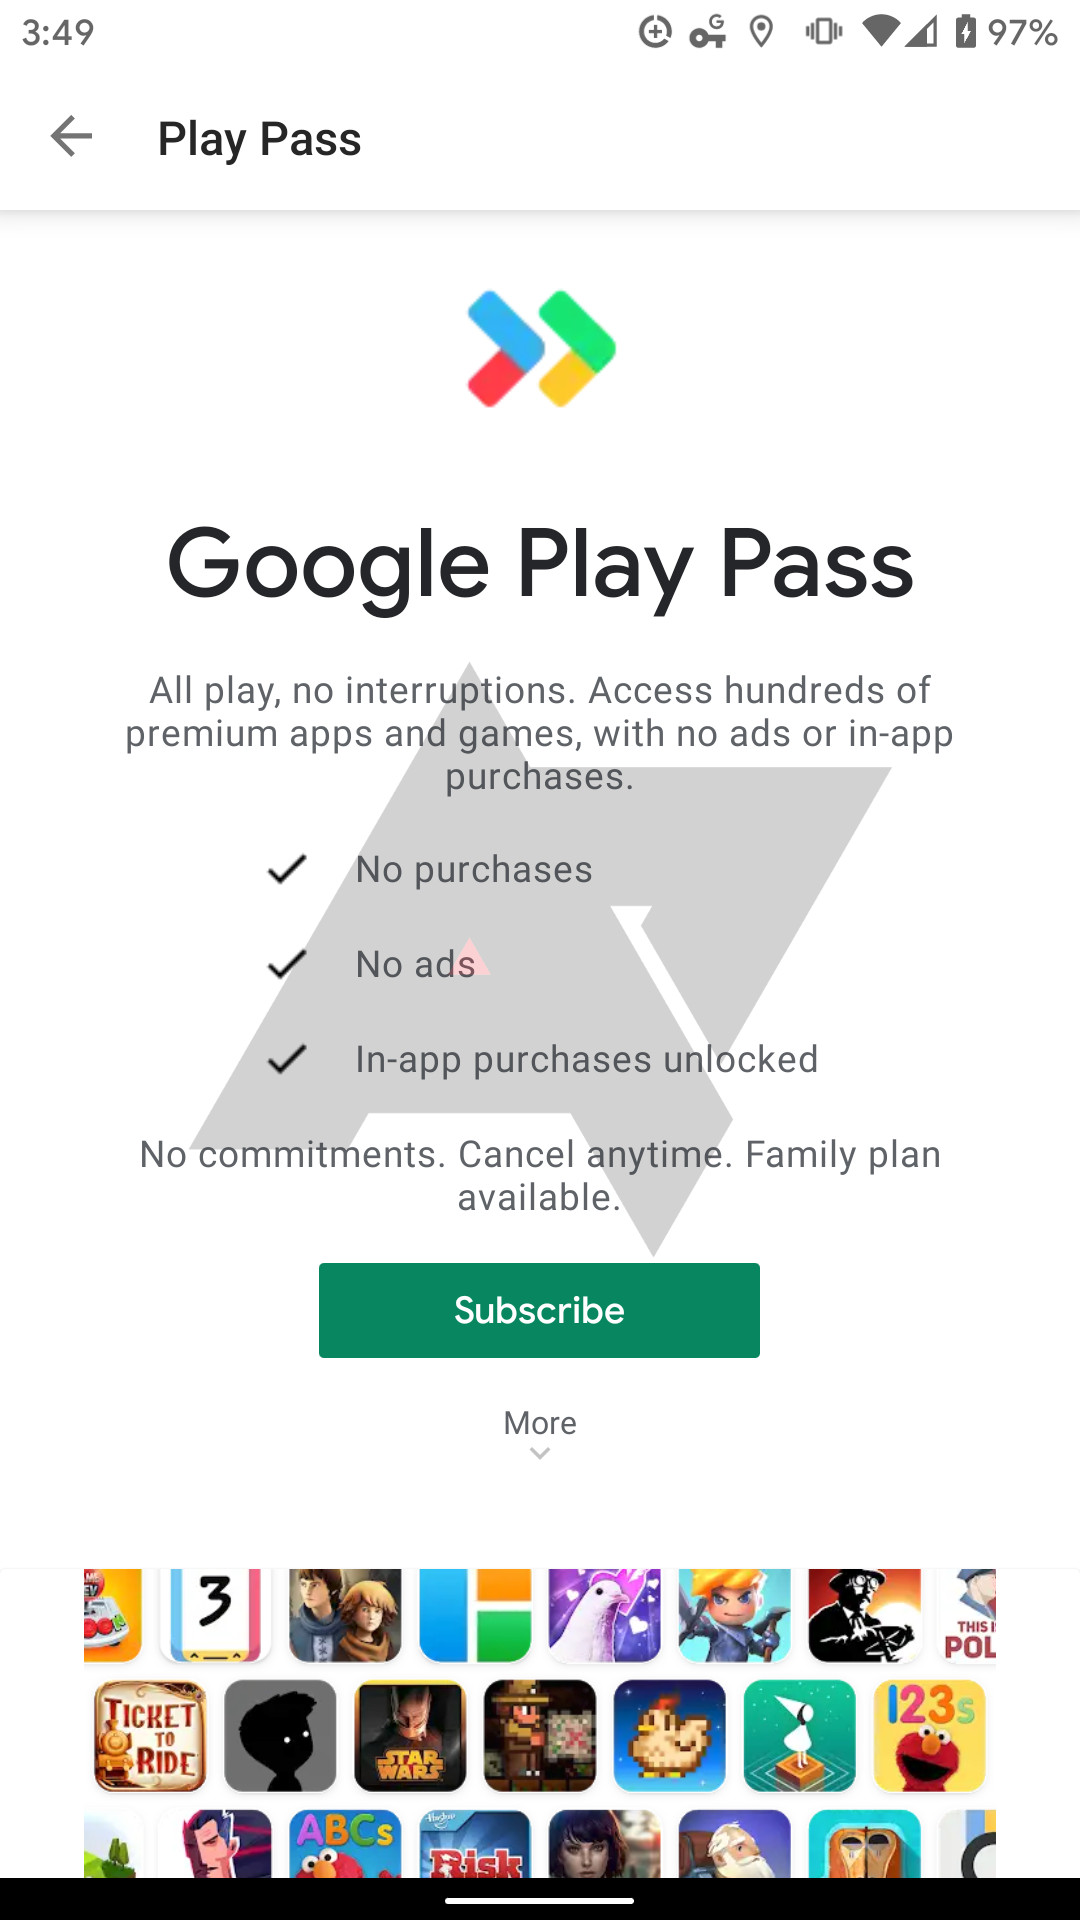 The Google Play Pass sign-up page.